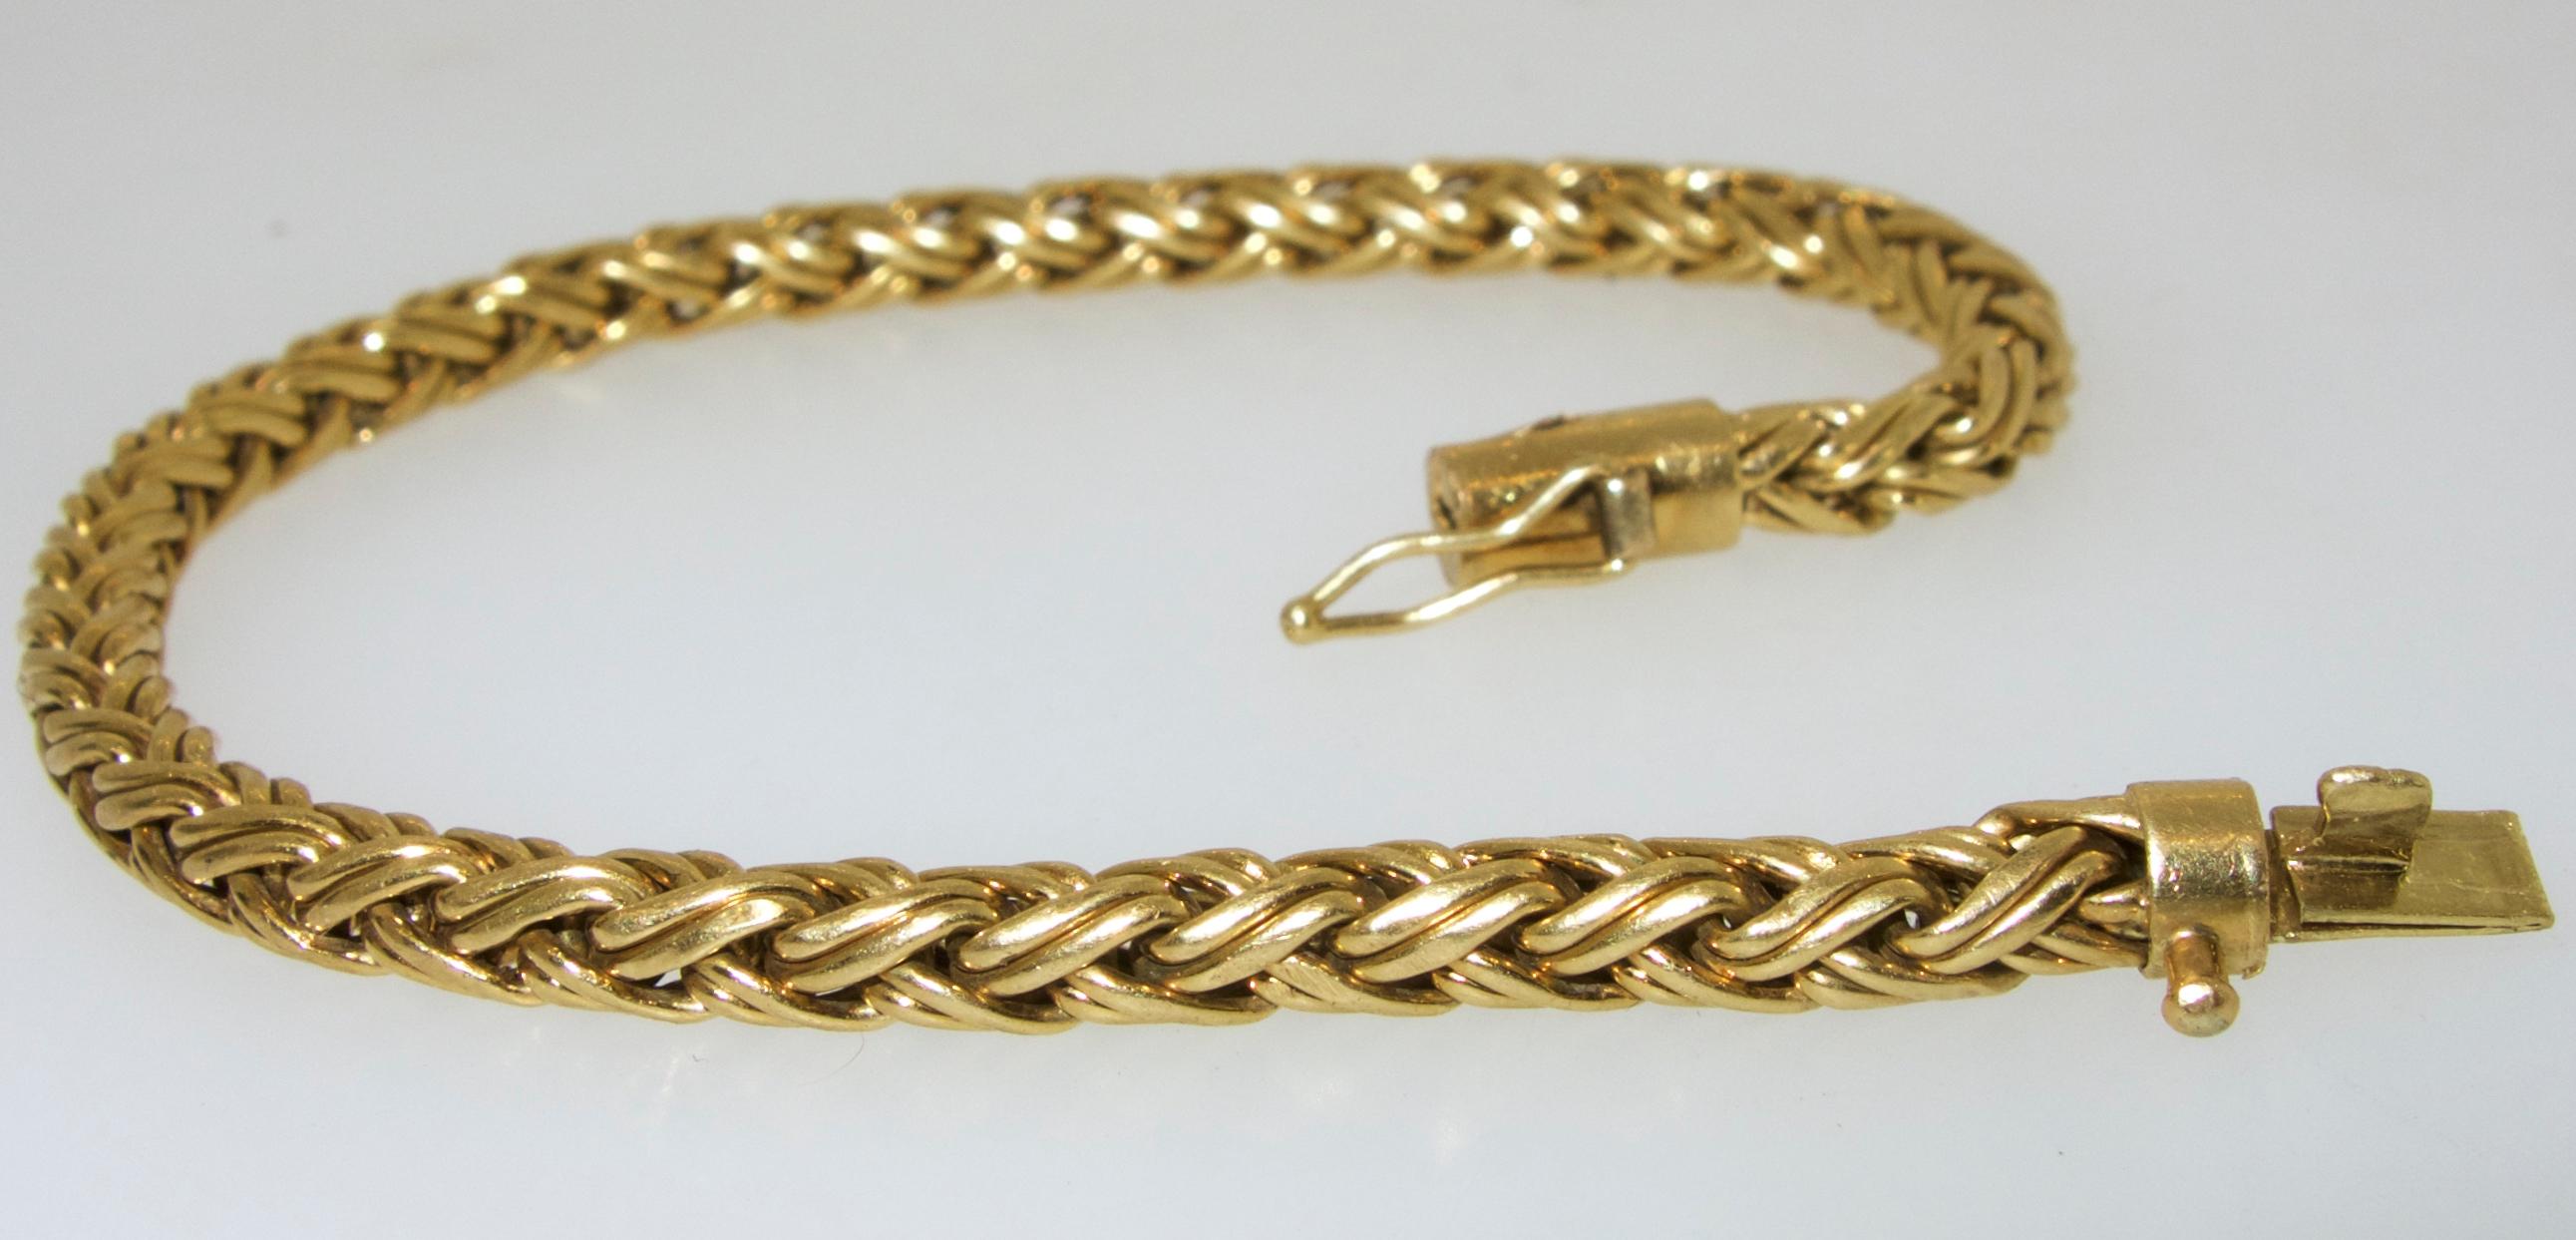 Tiffany & Co. 18K gold bracelet in a woven link.  7 inches long, signed on the clasp with 750 for 18K.  This bracelet weighs 10.8 grams.